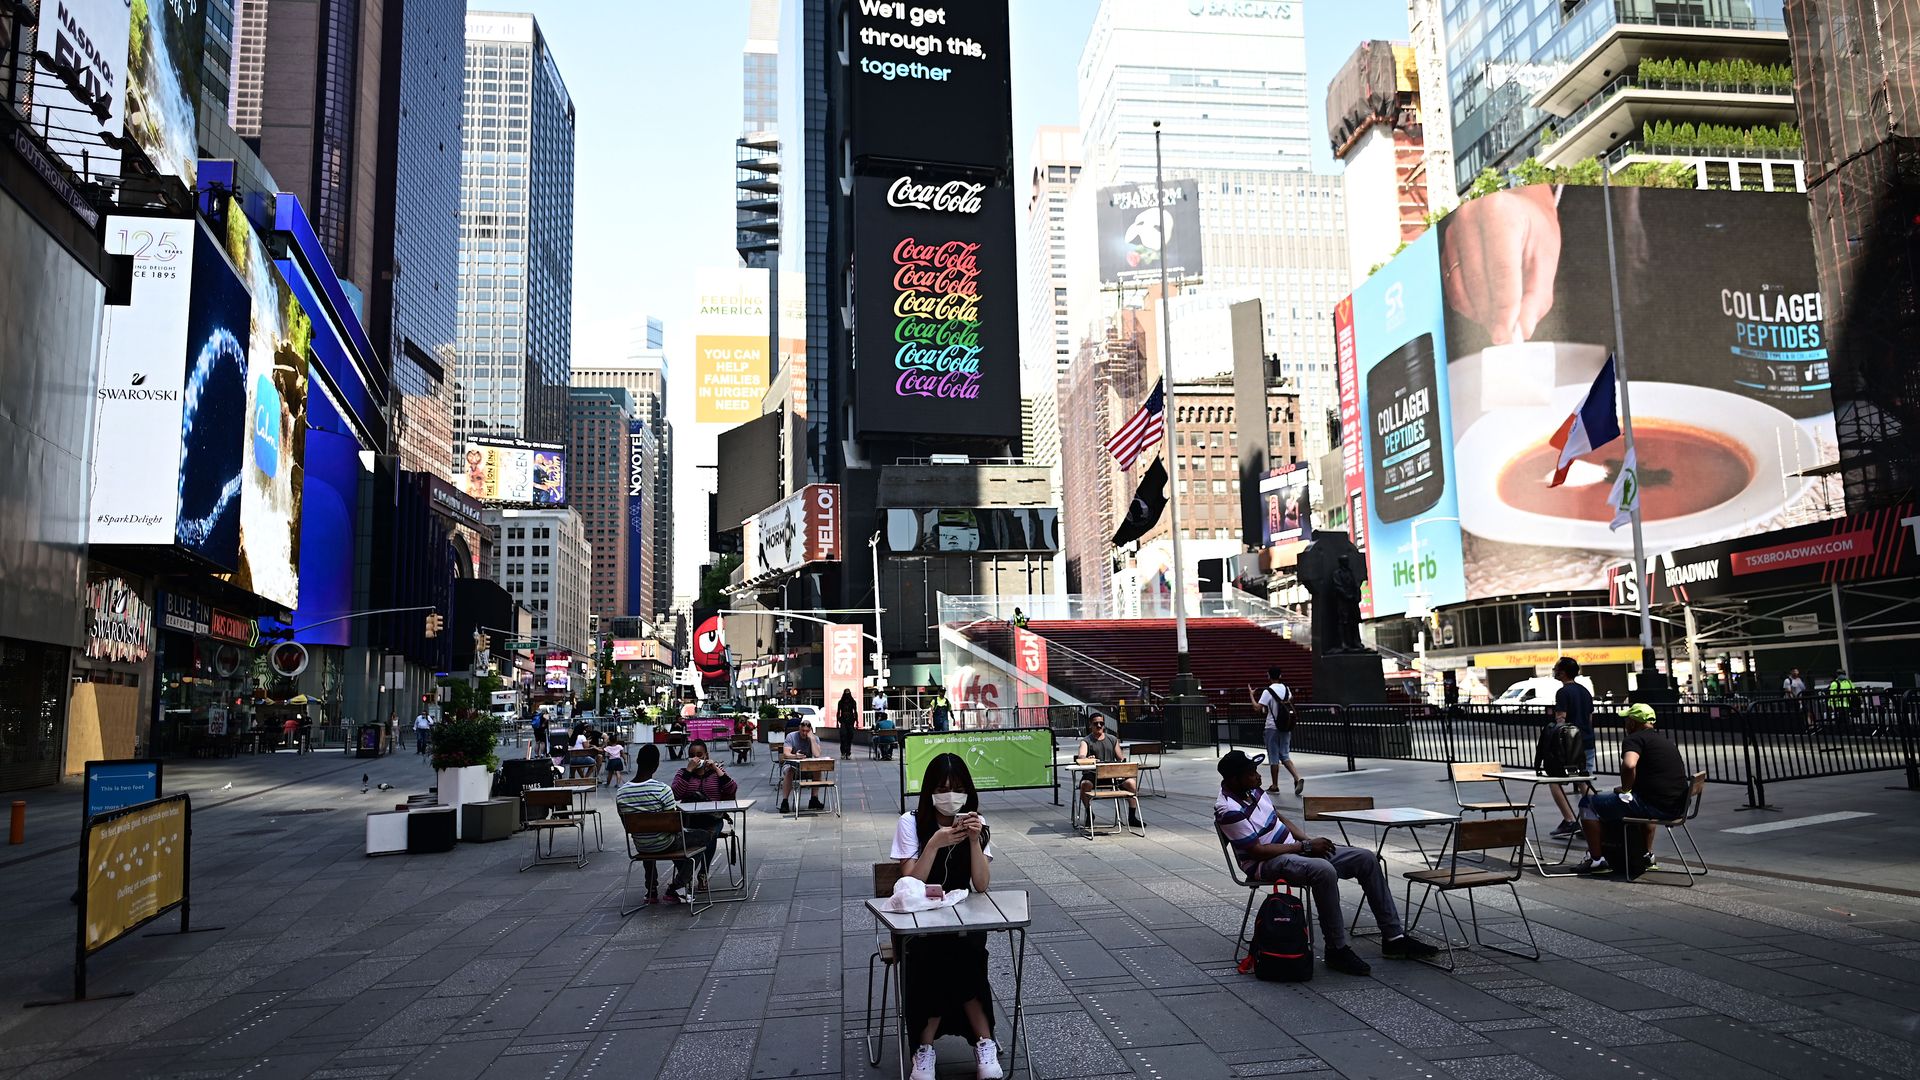 People sit on tables, respecting social distancing at Times Square as New York City enters phase two of reopening June 22